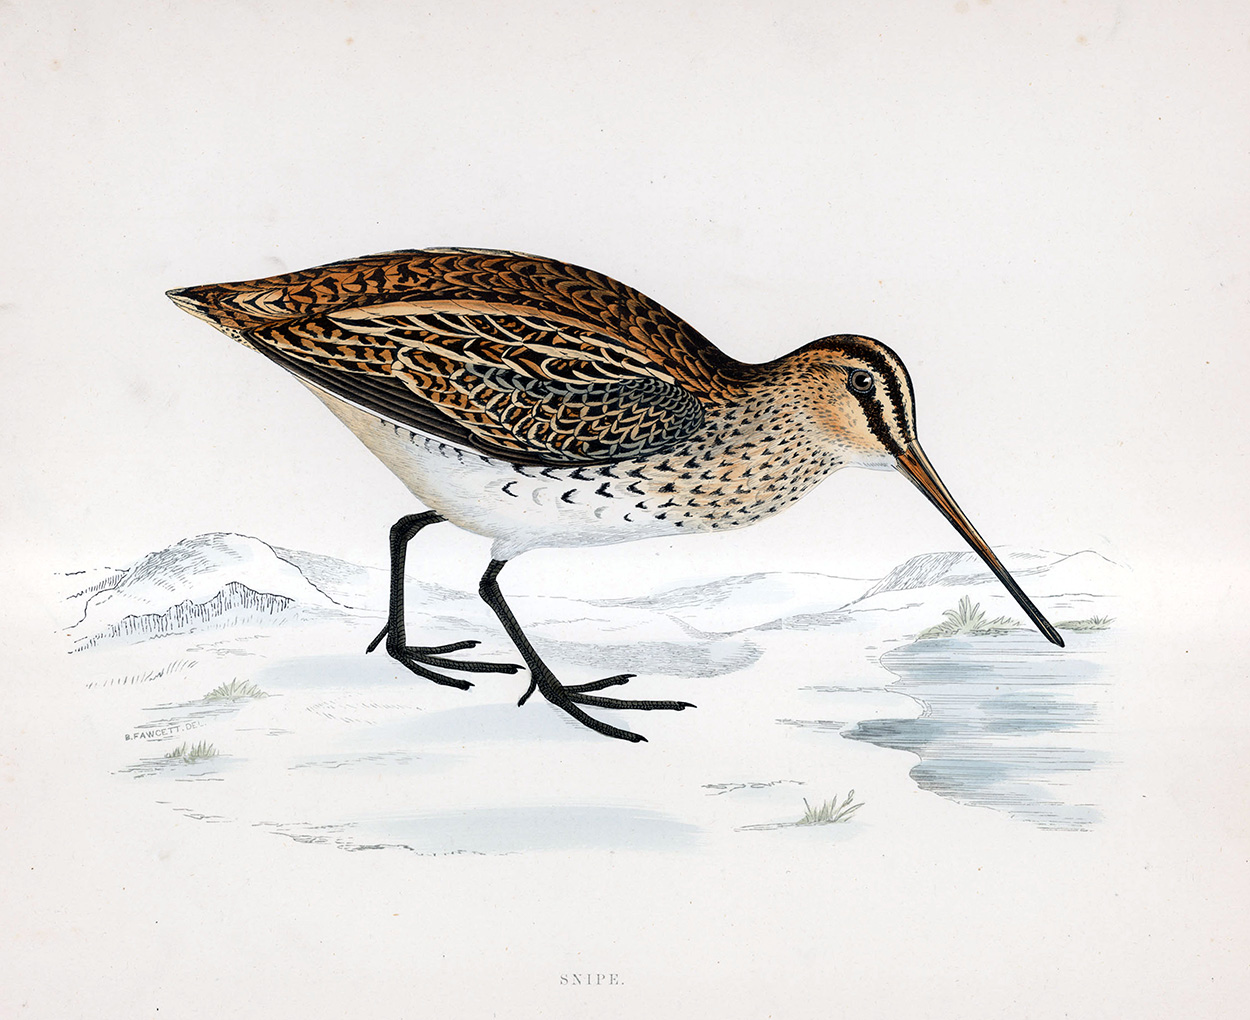 Snipe - hand coloured lithograph 1891 (Print) art by Beverley R Morris Art at The Illustration Art Gallery